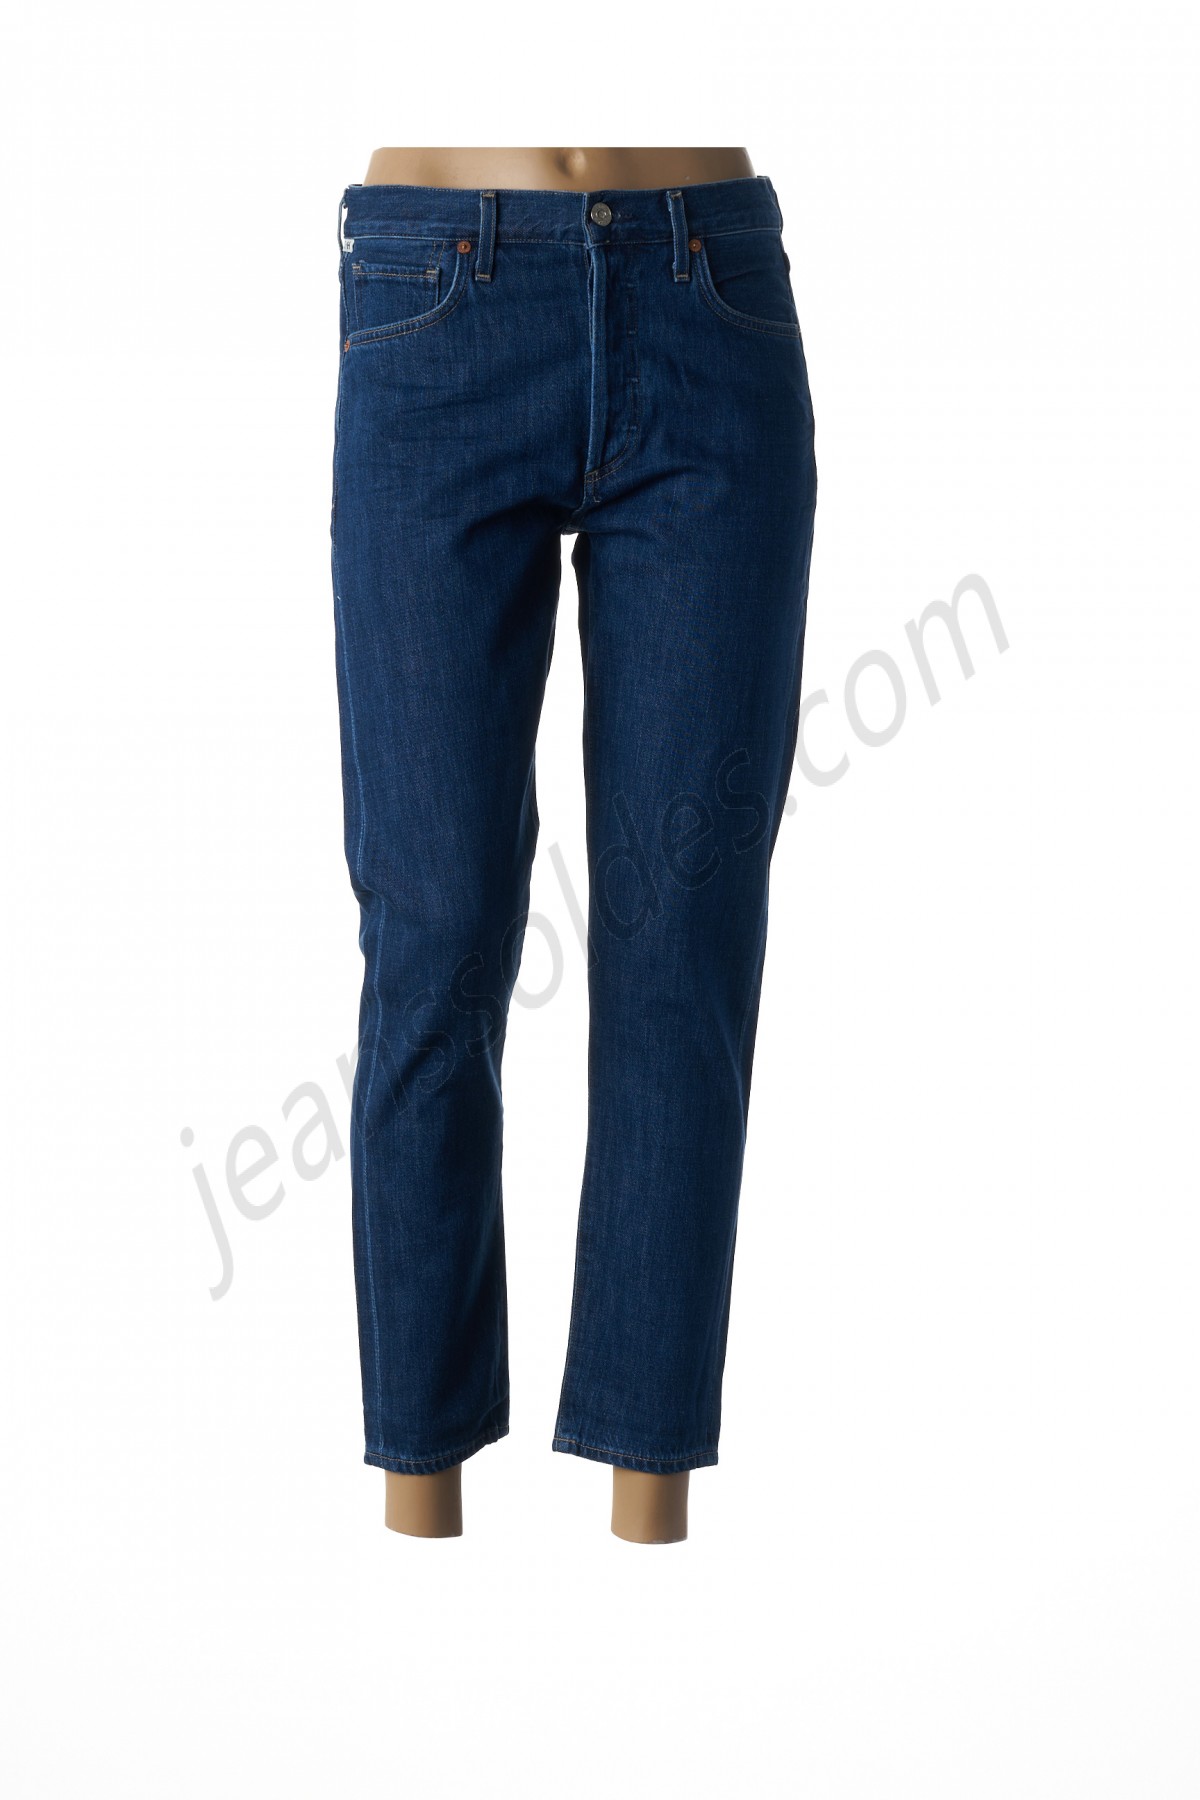 citizens of humanity-Jeans coupe droite prix d’amis - -0